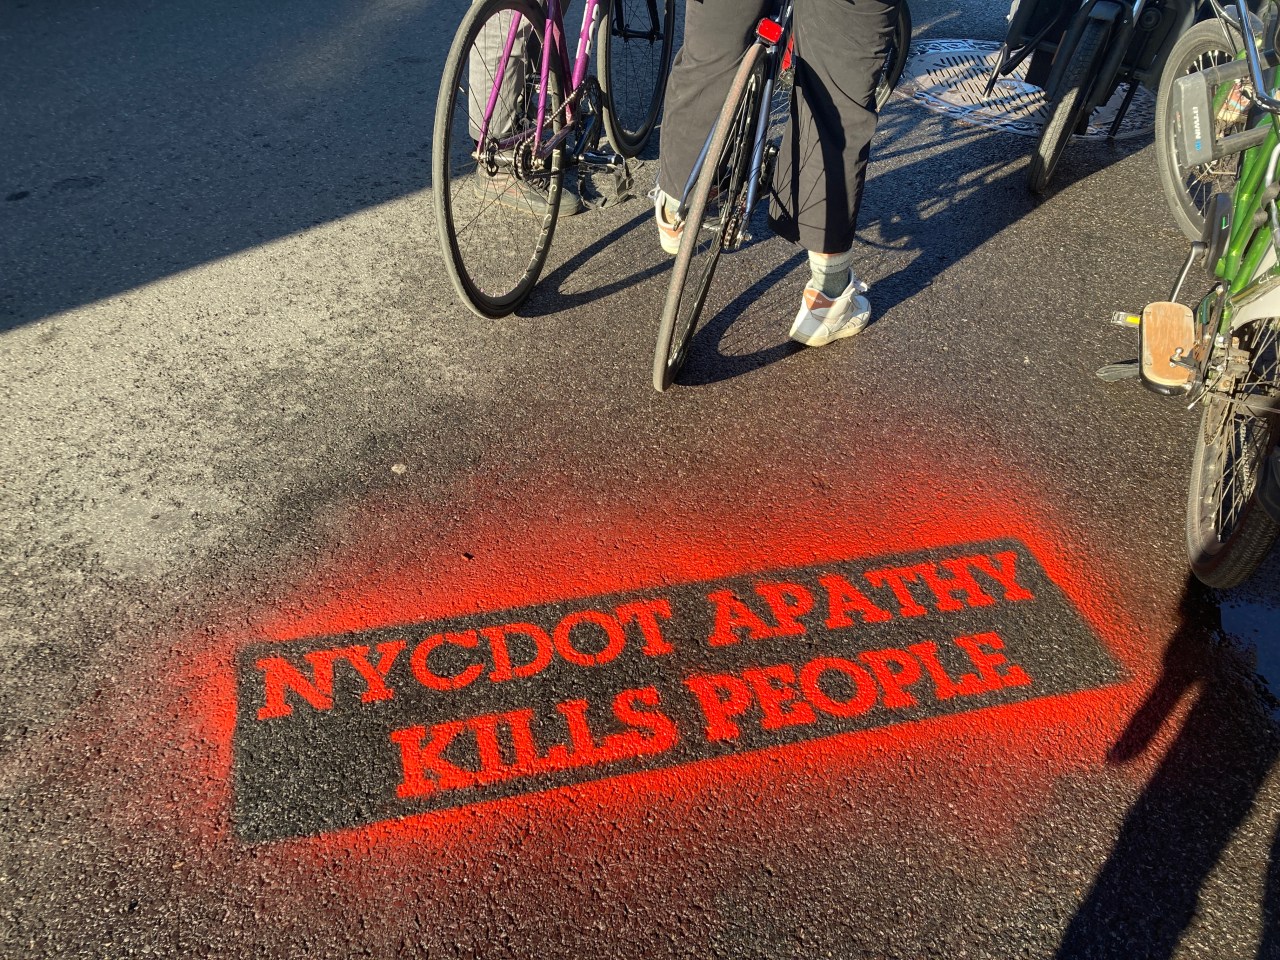 Cyclists staged a "die-in" on Friday morning, 10 days after 37-year-old Sarah Schick was killed on a Citi Bike on Ninth Street. Photo: Julianne Cuba